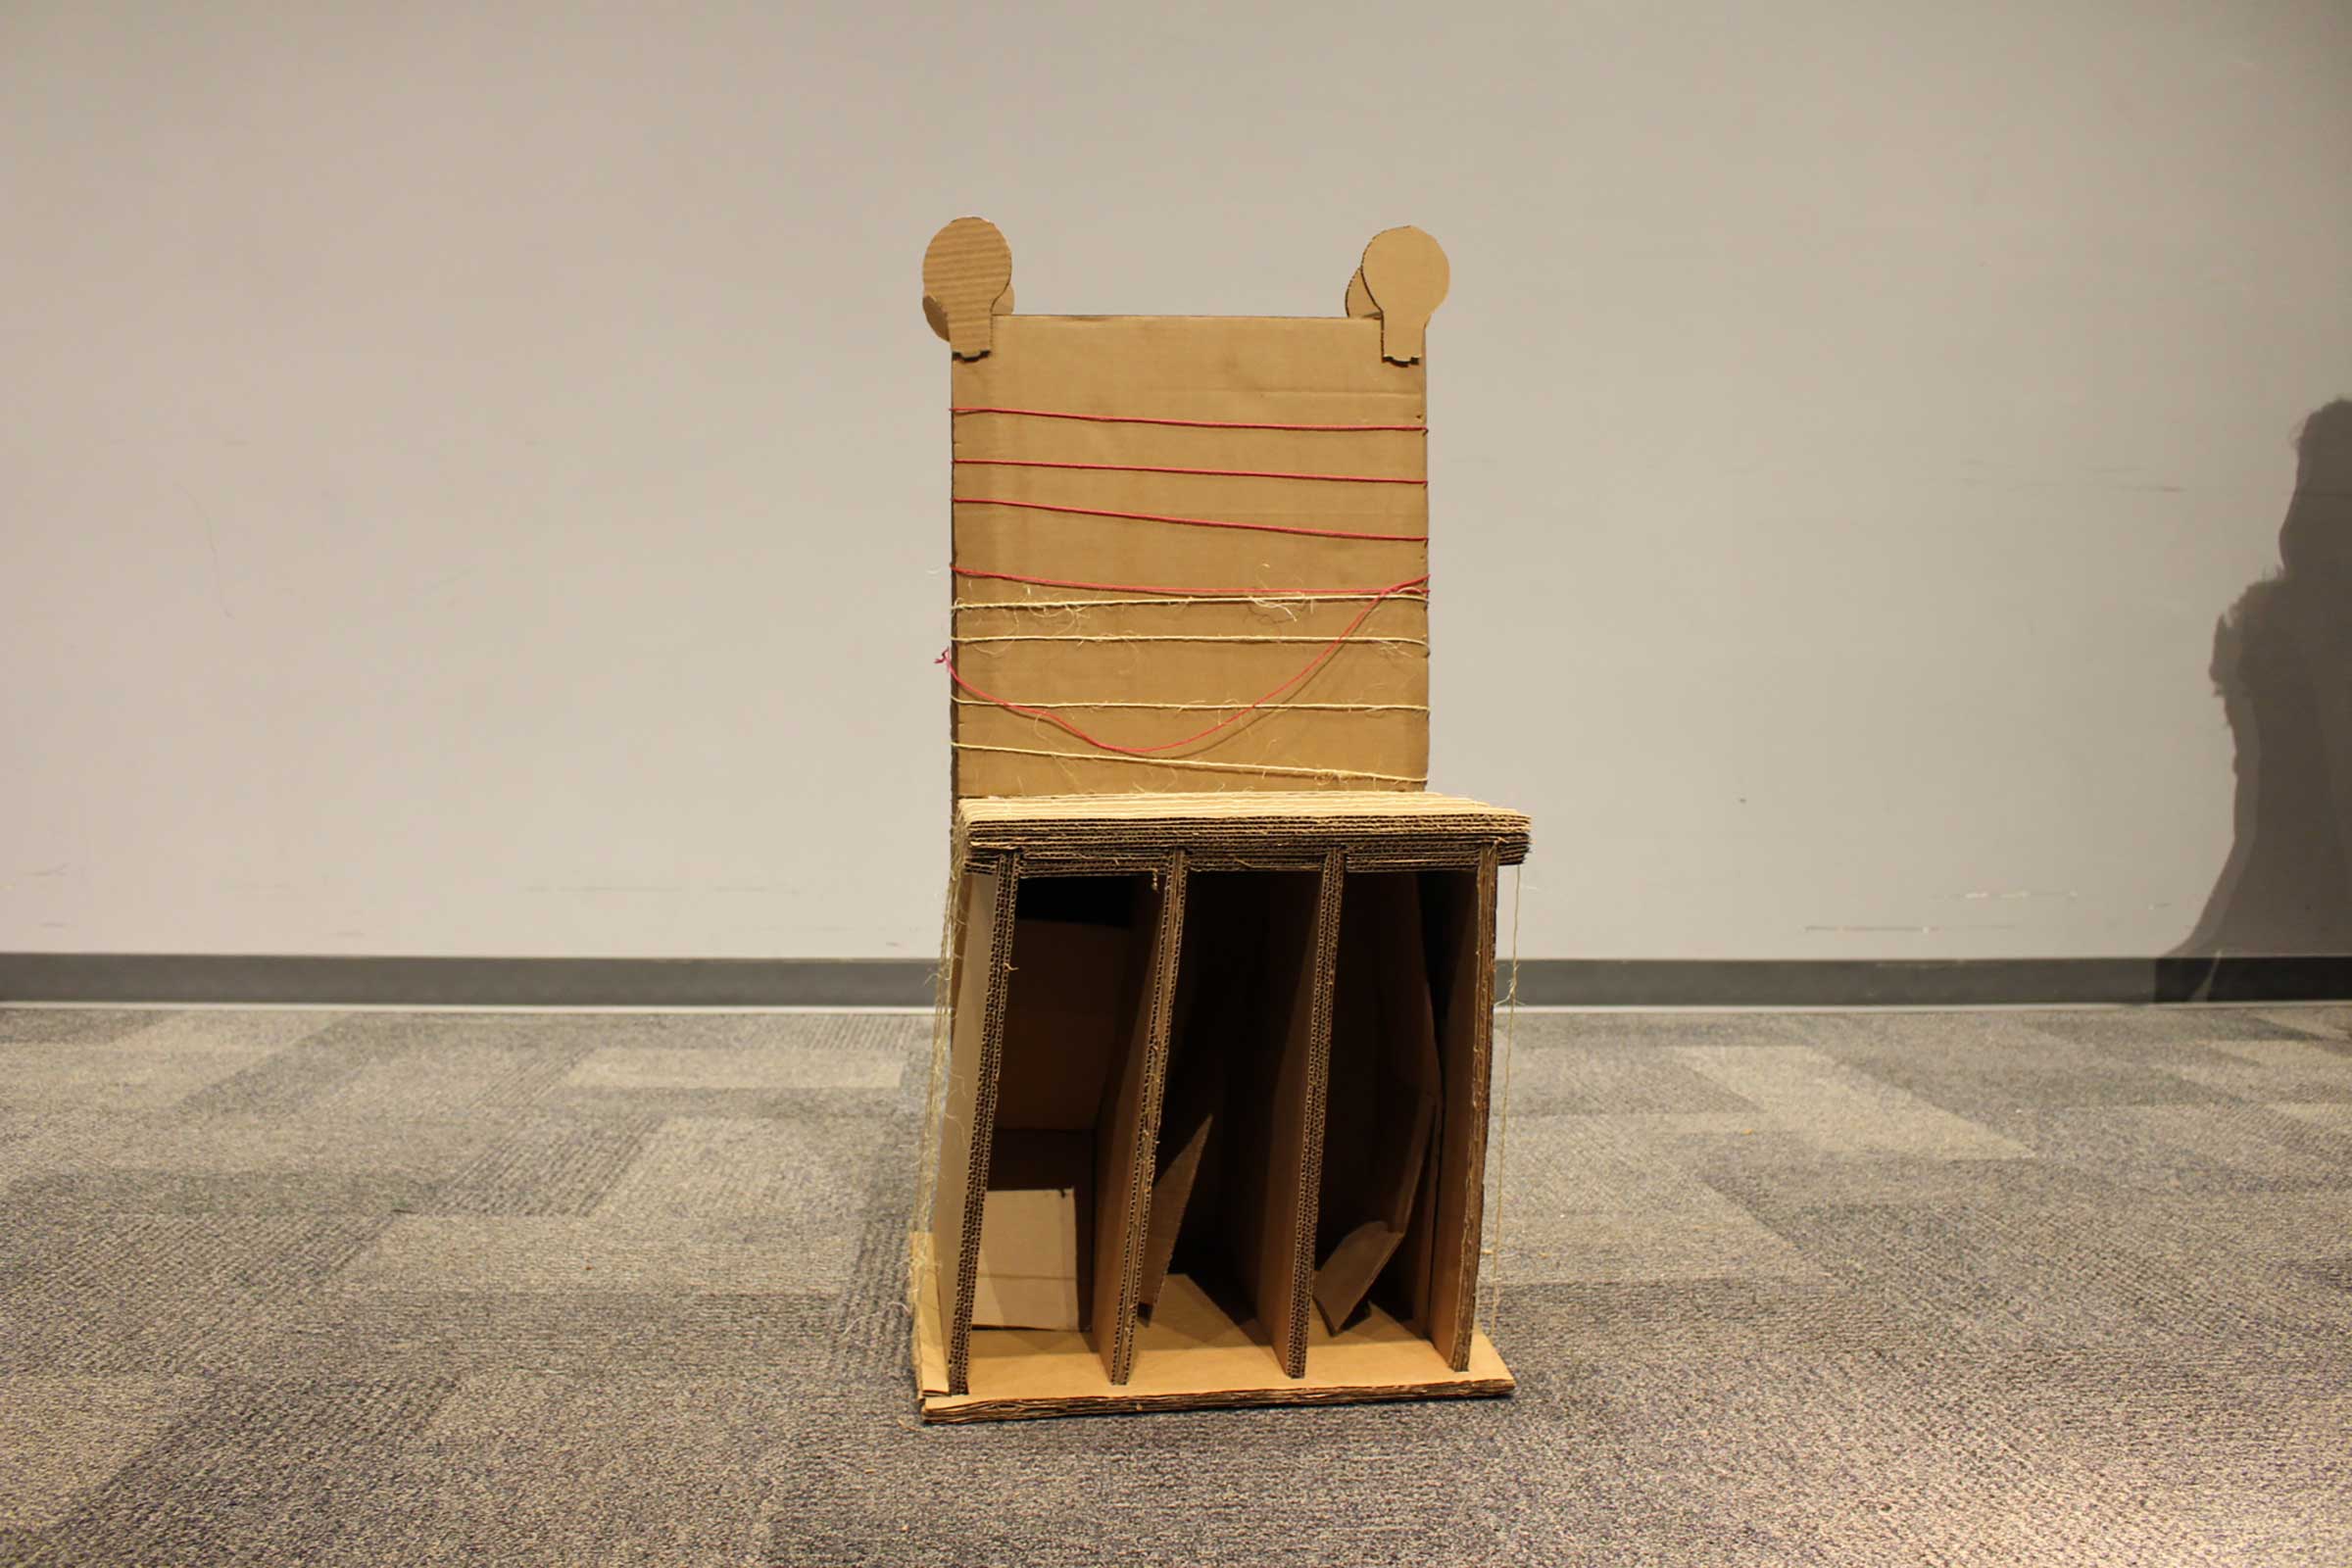 Day 4: Cardboard Sitting Device – Review 23